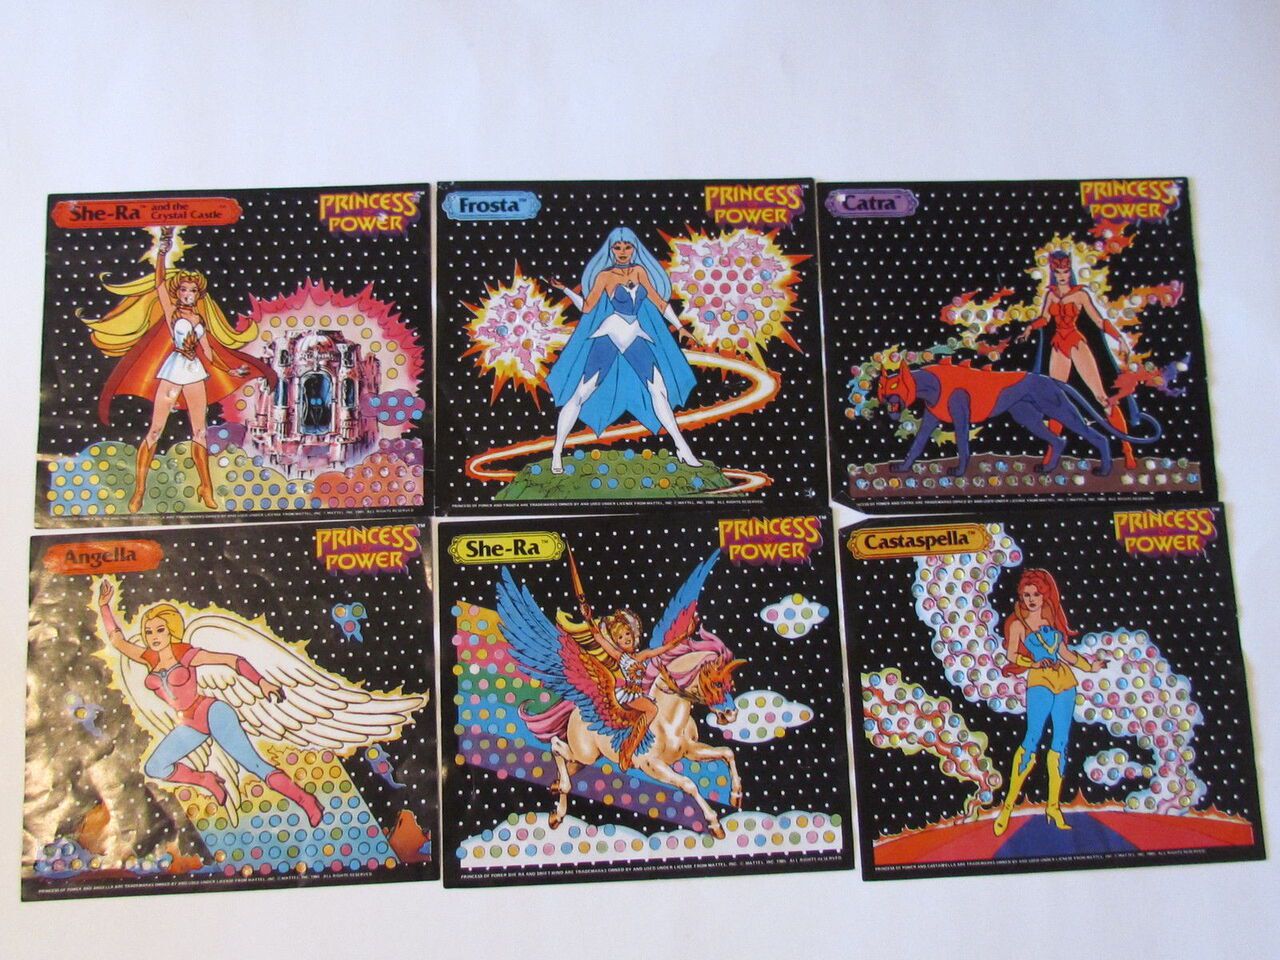 She-Ra: Princess of Power (1985) - (figures, dolls, toys and objects) 86